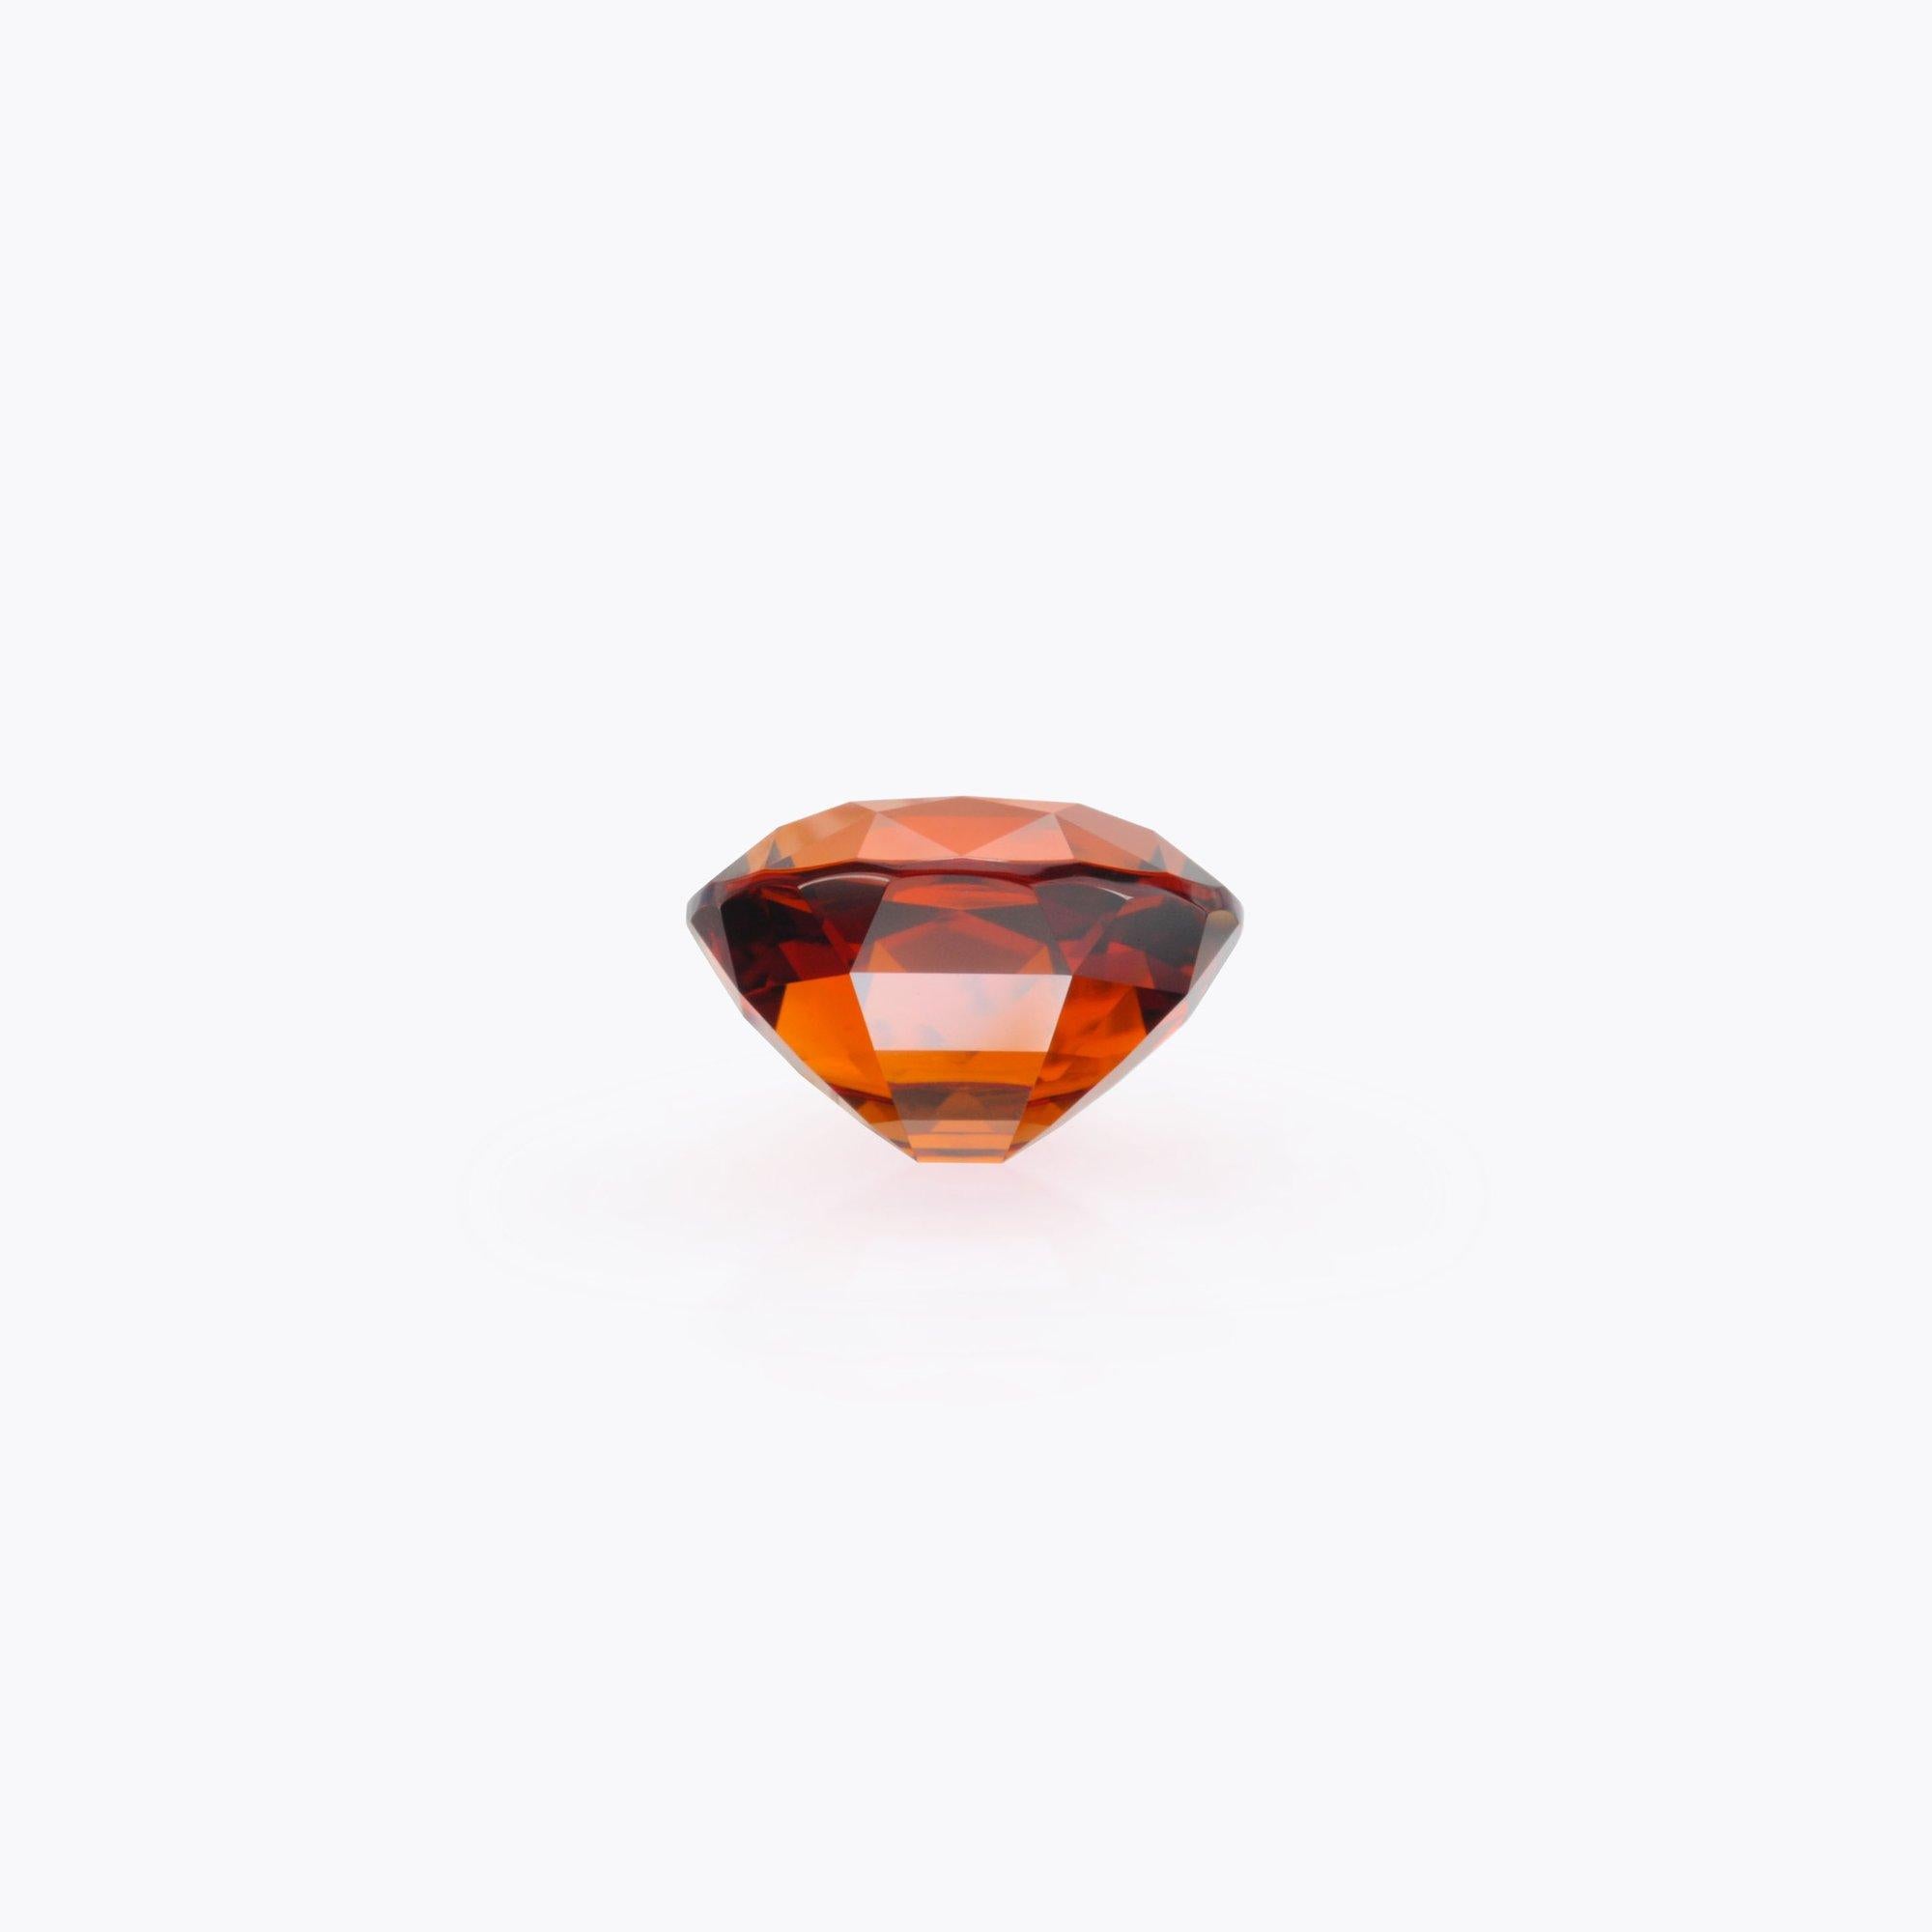 Remarkable 6.75 carat Mandarin Garnet oval gem offered loose to the worlds' most avid gem collectors.
Returns are accepted and paid by us within 7 days of delivery.
We offer supreme custom jewelry work upon request. Please contact us for more